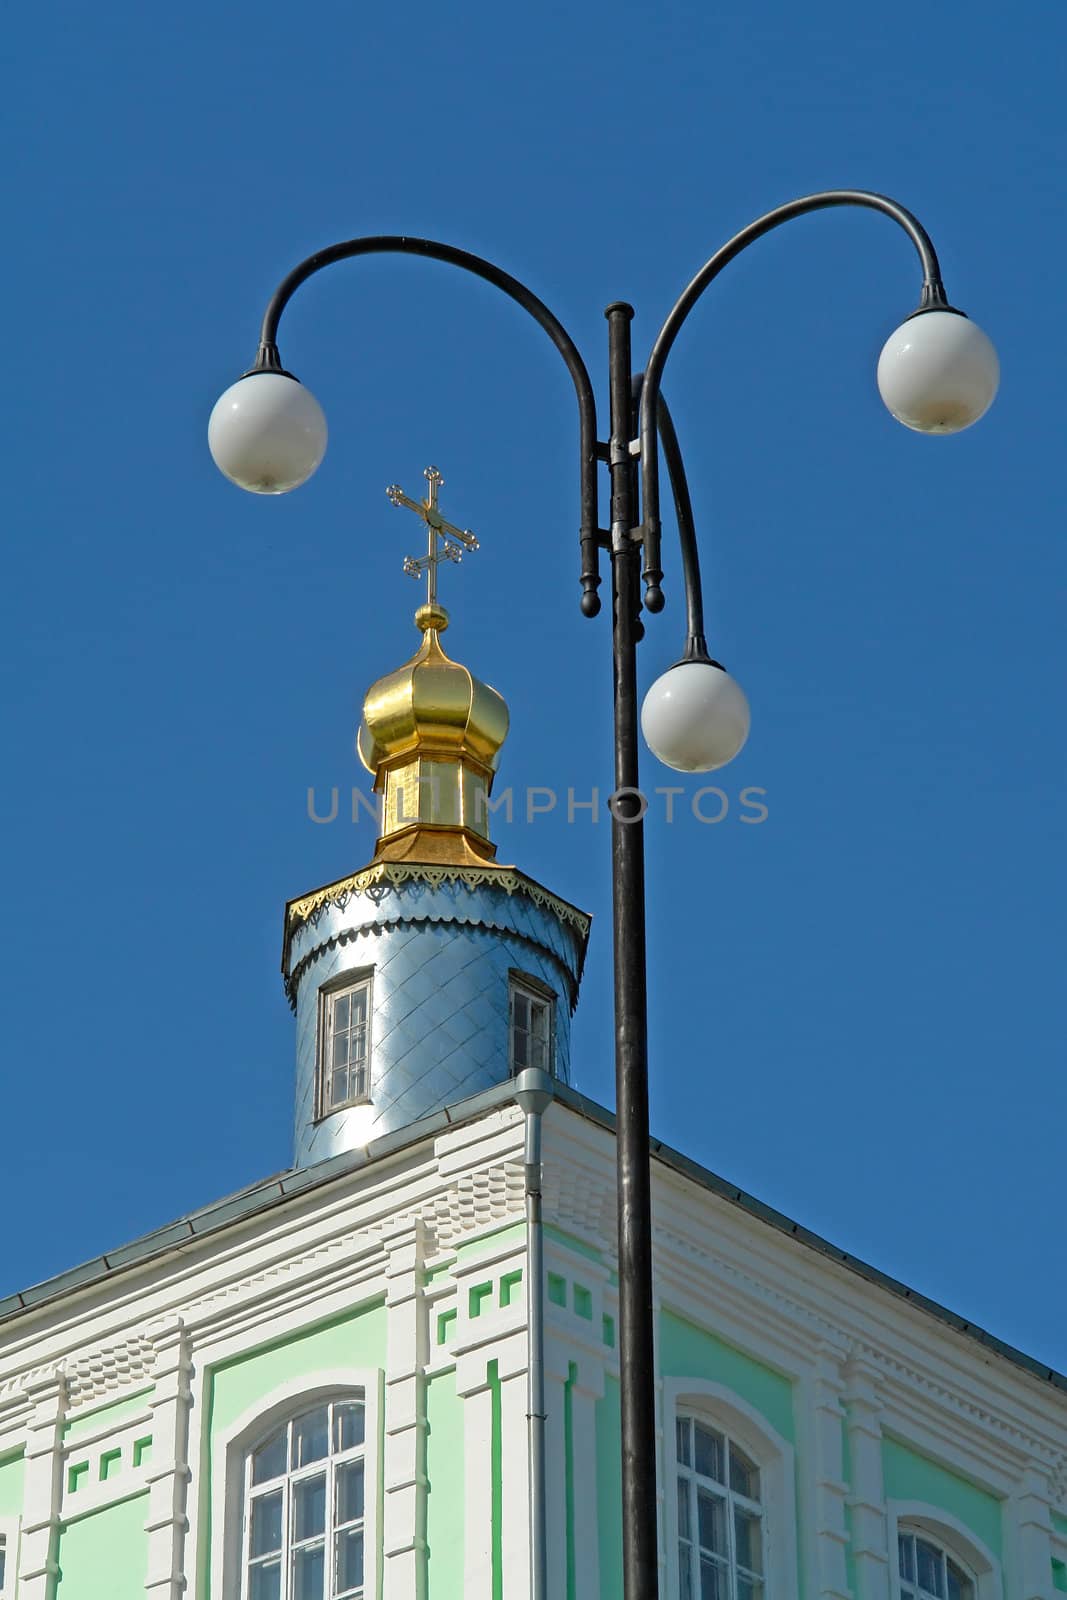 Street lamp and dome-shaped roof of an orthodox temple                               